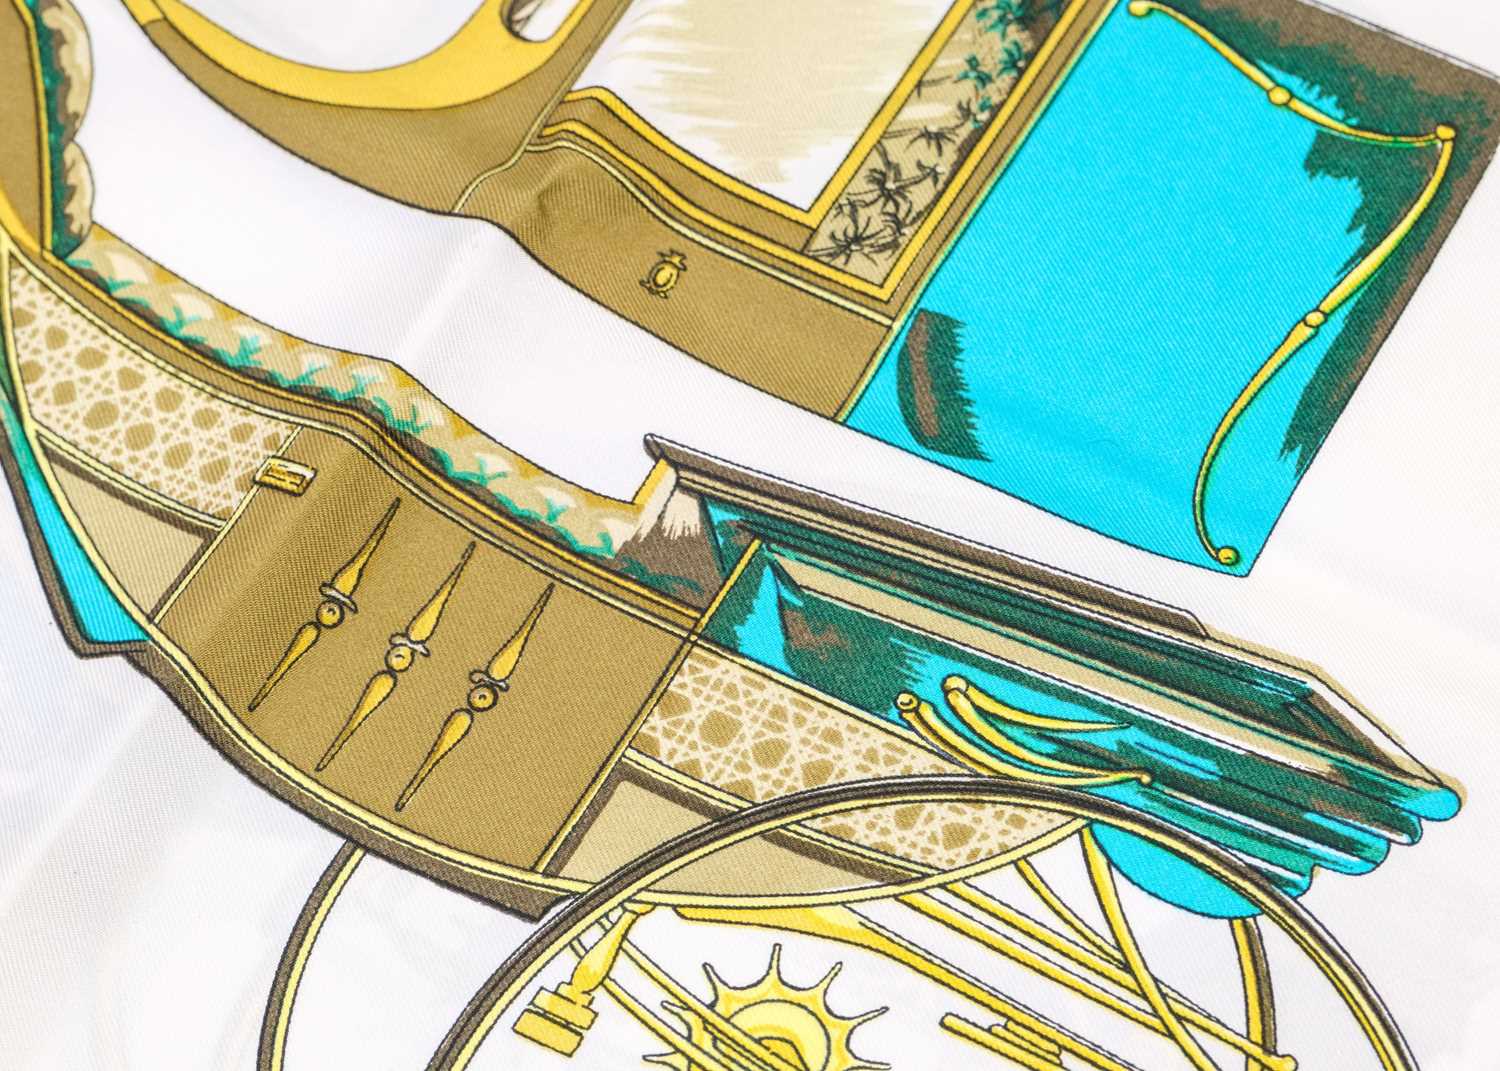 HERMES - A silk scarf in 'Les voitures a transformation' pattern designed by La Perriere. - Image 4 of 6